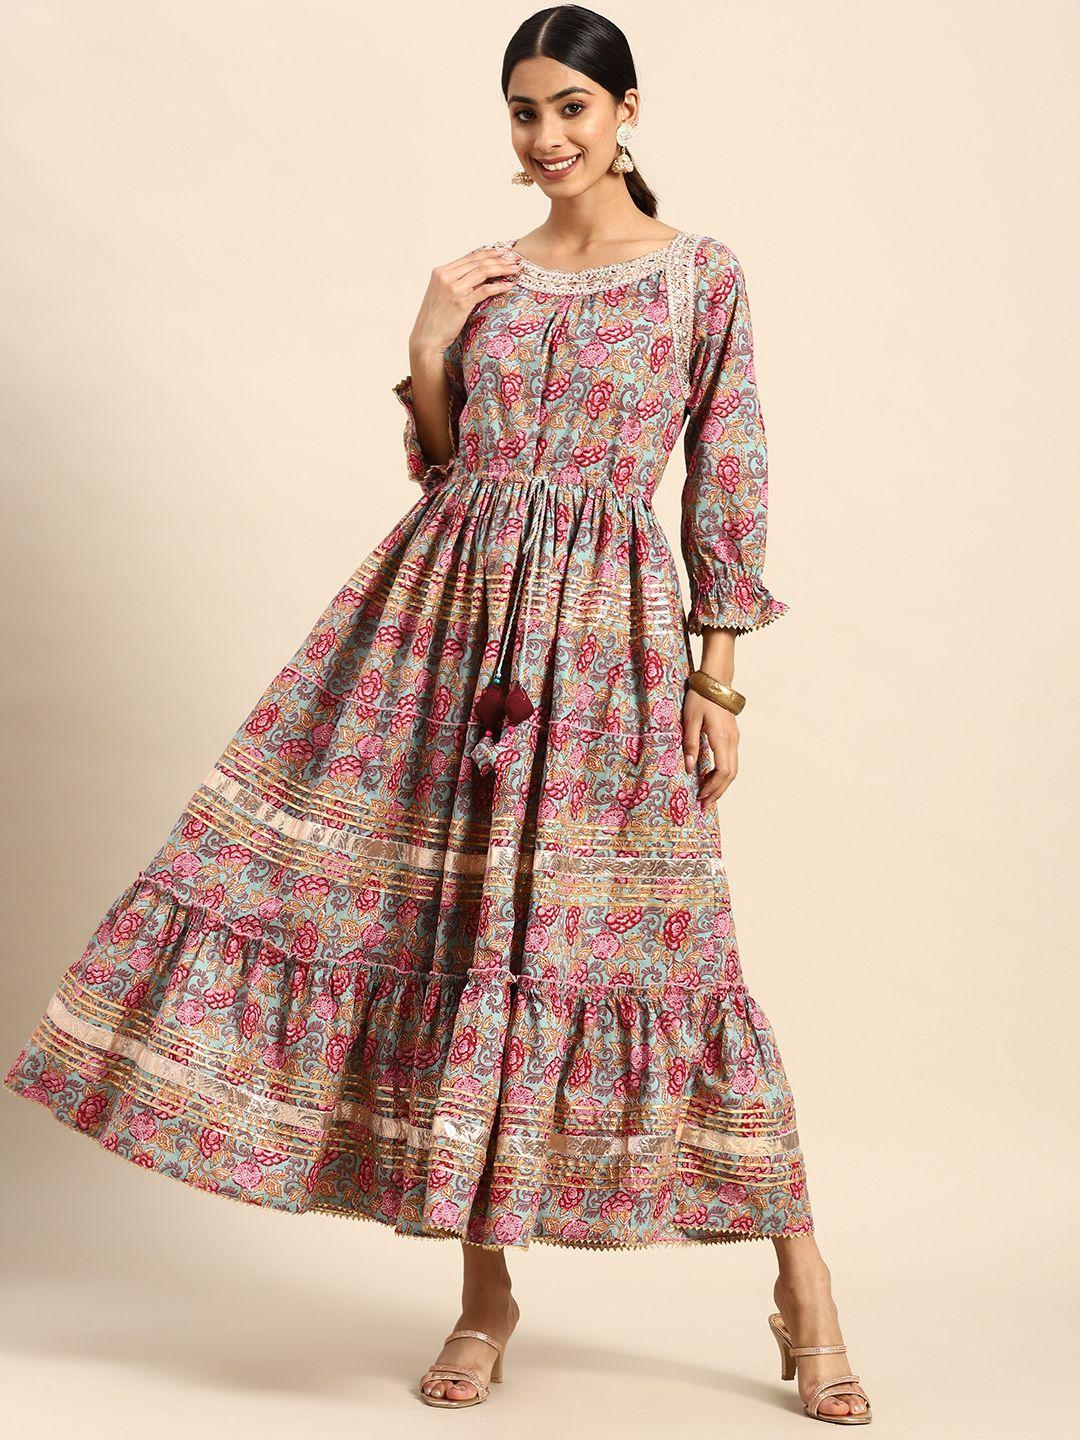 rangmayee-floral-print-puff-sleeves-embellished-tiered-maxi-ethnic-dress